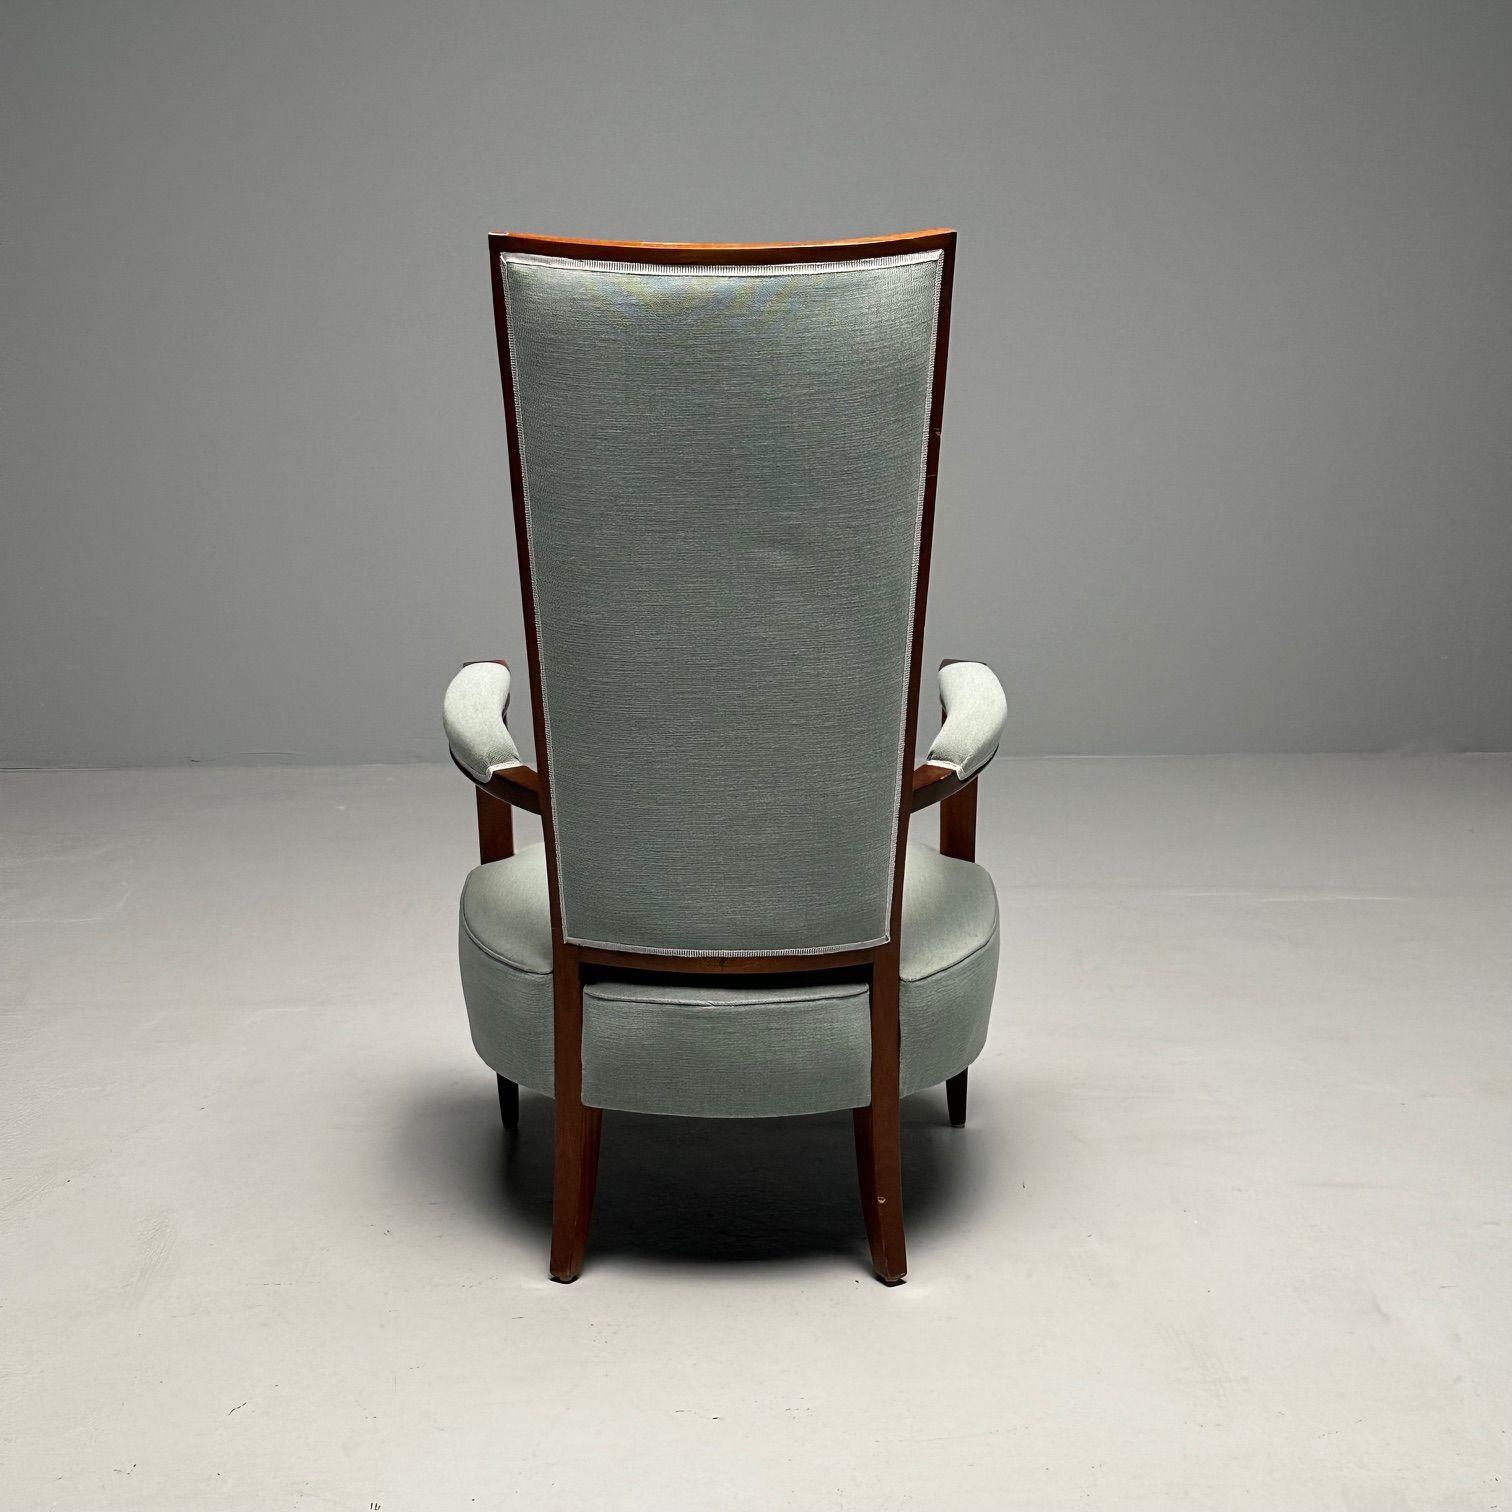 French Art Deco, High-Back Chairs, Mahogany, Turqoise Linen, France, 1970s For Sale 3